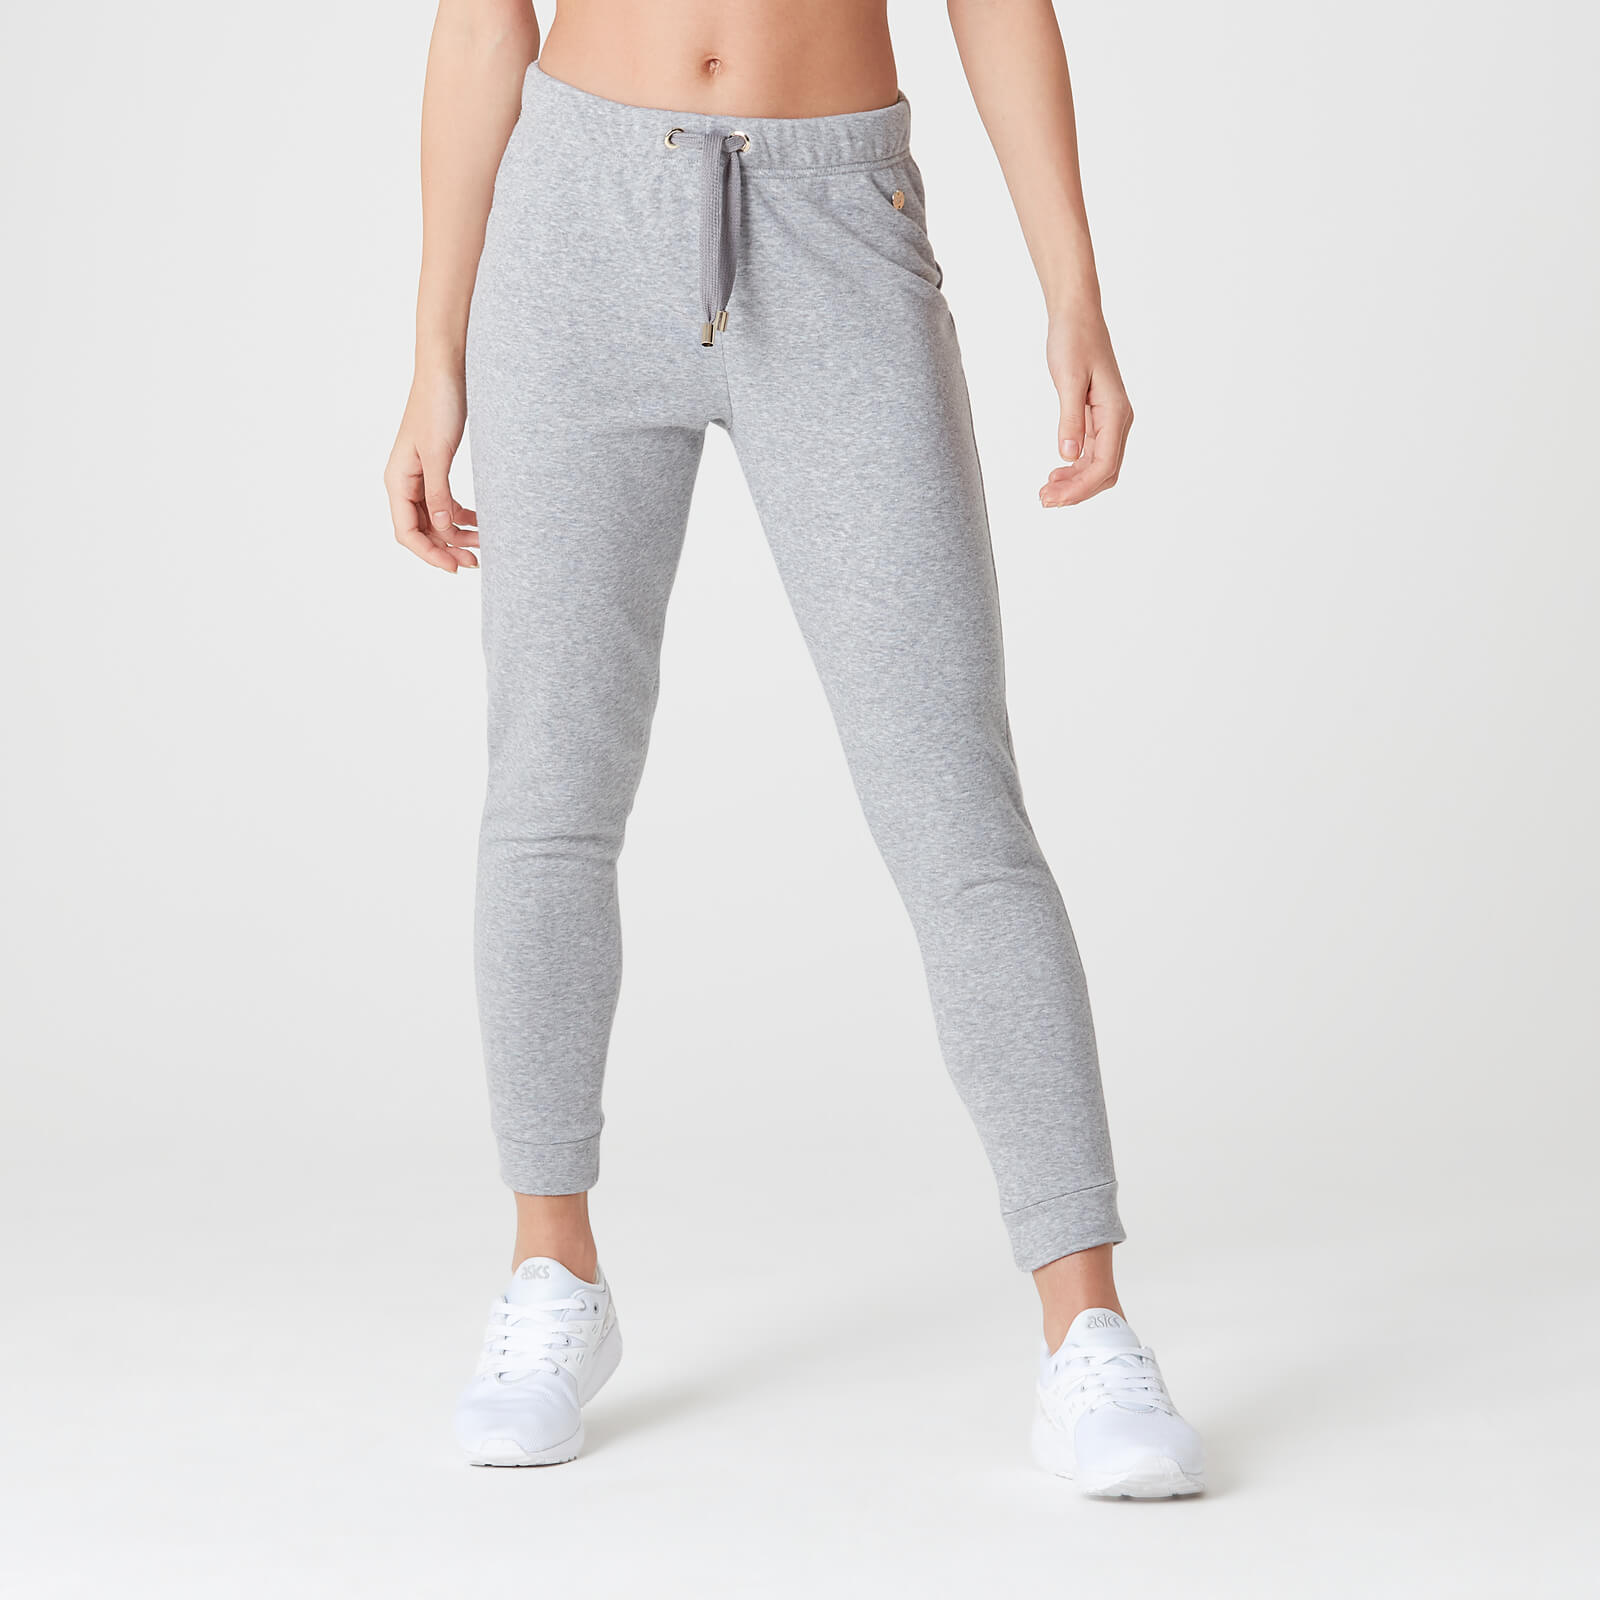 Myprotein Luxe Lounge Jogger - Grey Marl - M